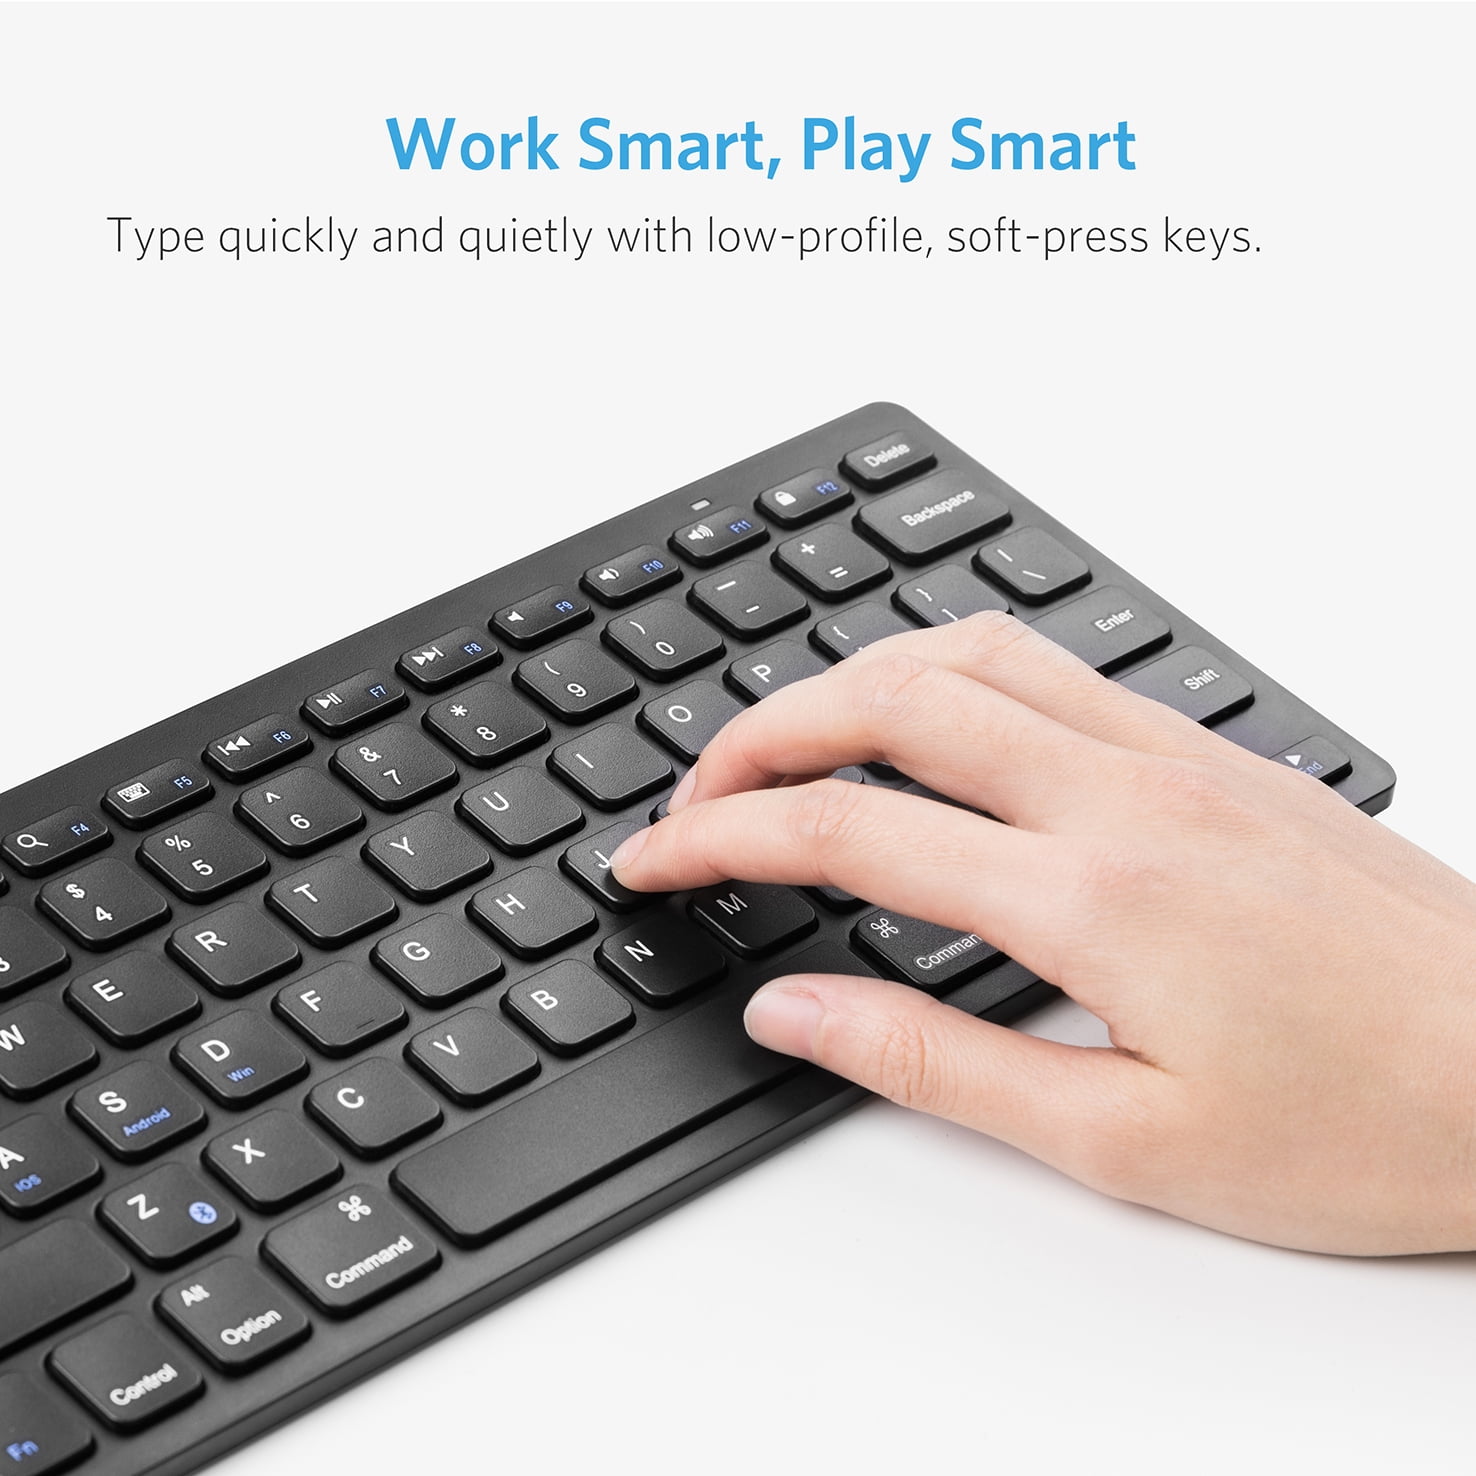 Anker Bluetooth Ultra-Slim Keyboard for iPad, Galaxy Tabs and Mobile Devices, Black - Walmart.com